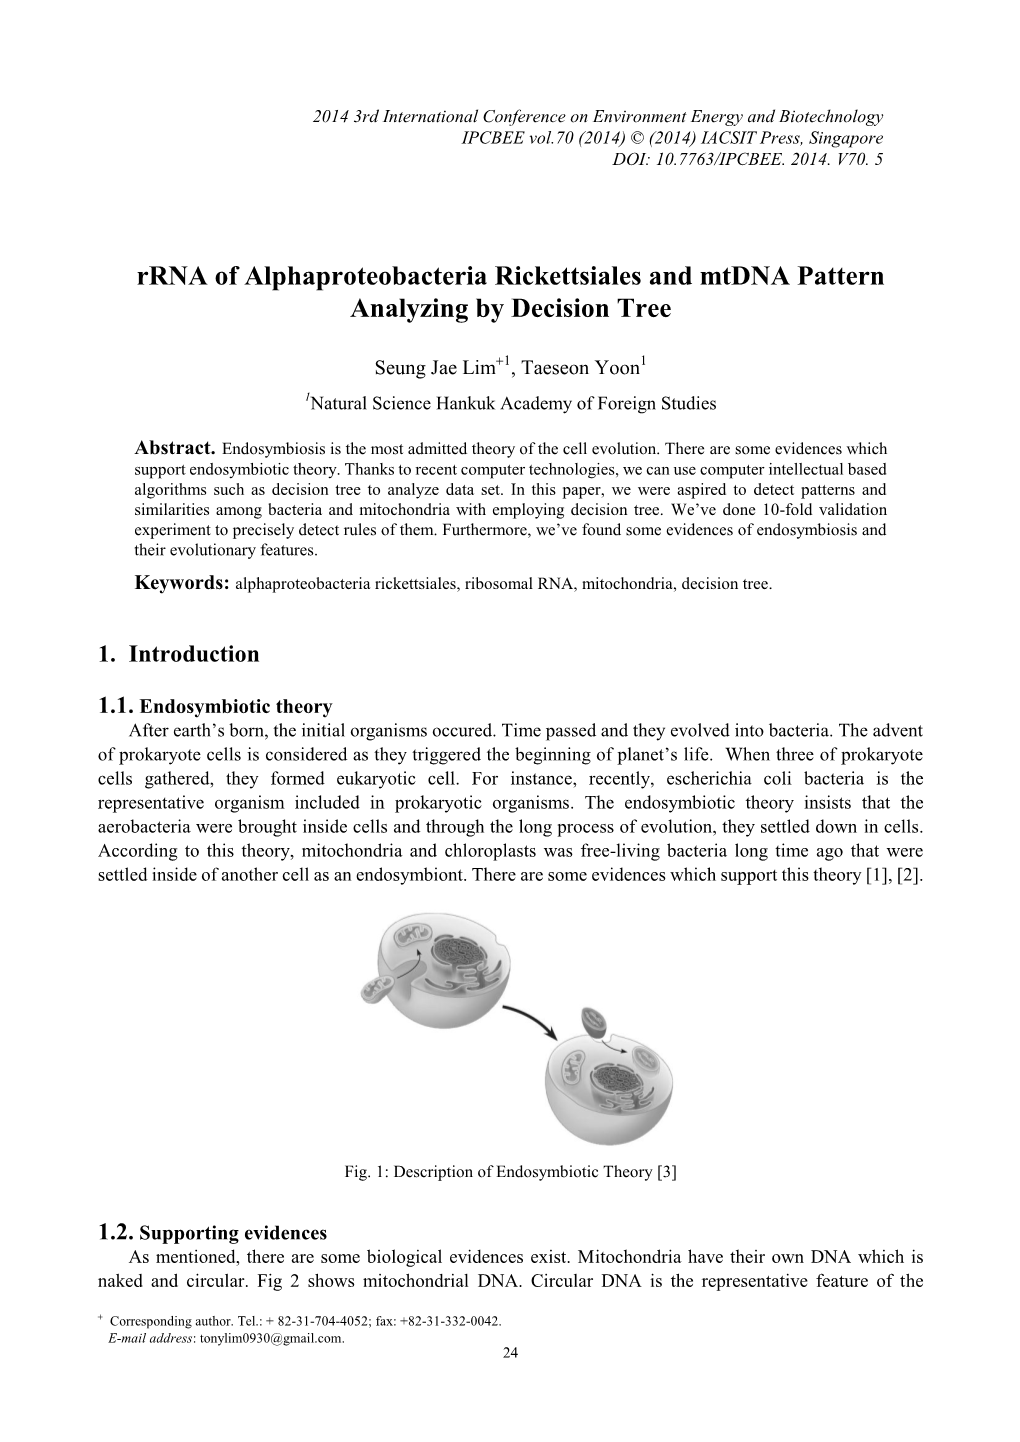 Rrna of Alphaproteobacteria Rickettsiales and Mtdna Pattern Analyzing by Decision Tree